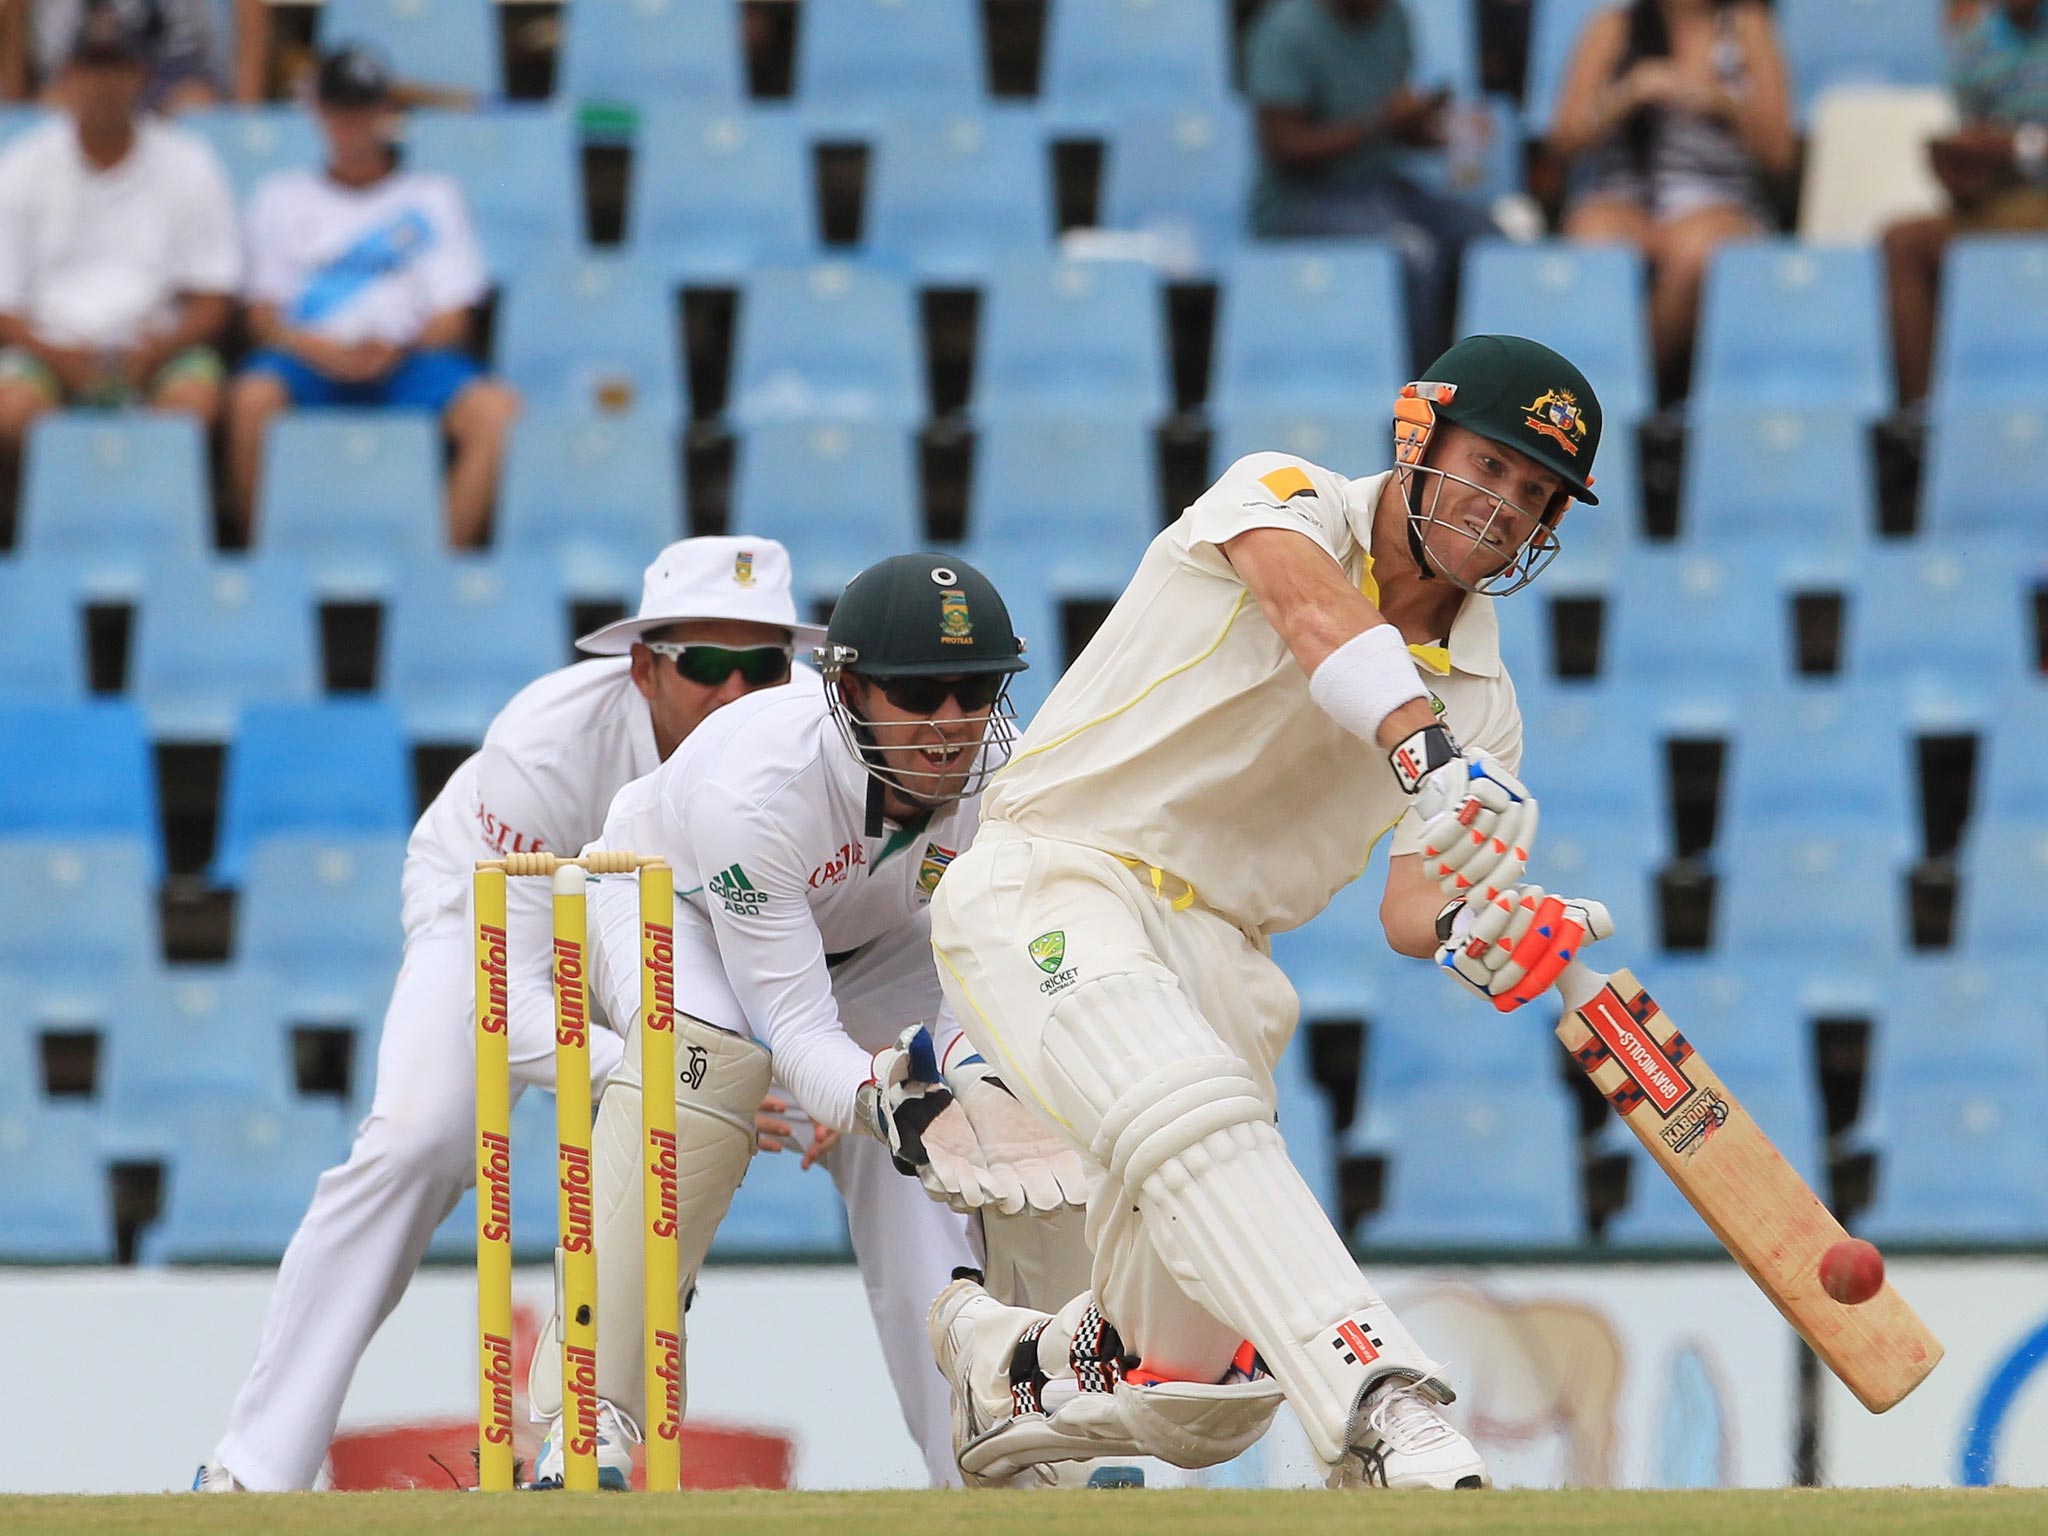 David Warner goes on the attack on his way to a century at Centurion